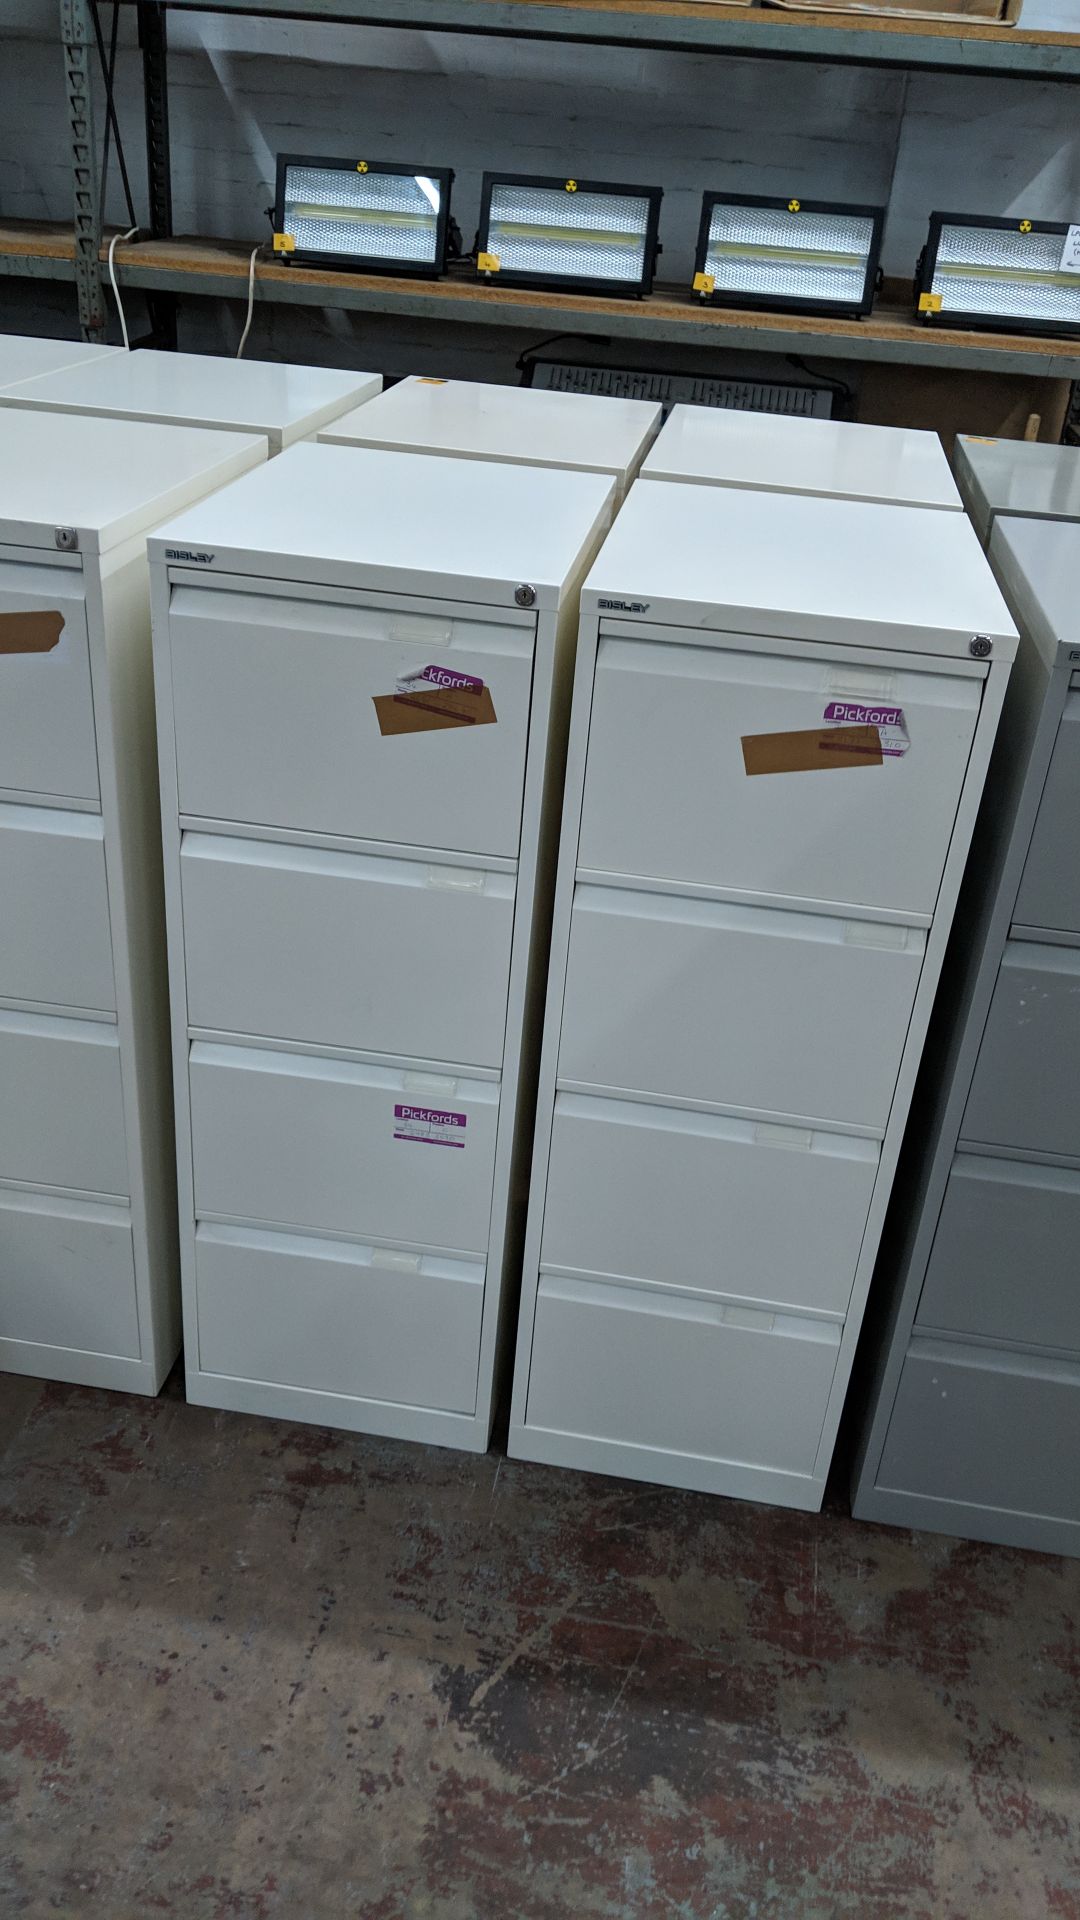 4 off Bisley off-white metal 4 drawer filing cabinets NB. One cabinet has a missing drawer - Image 4 of 7